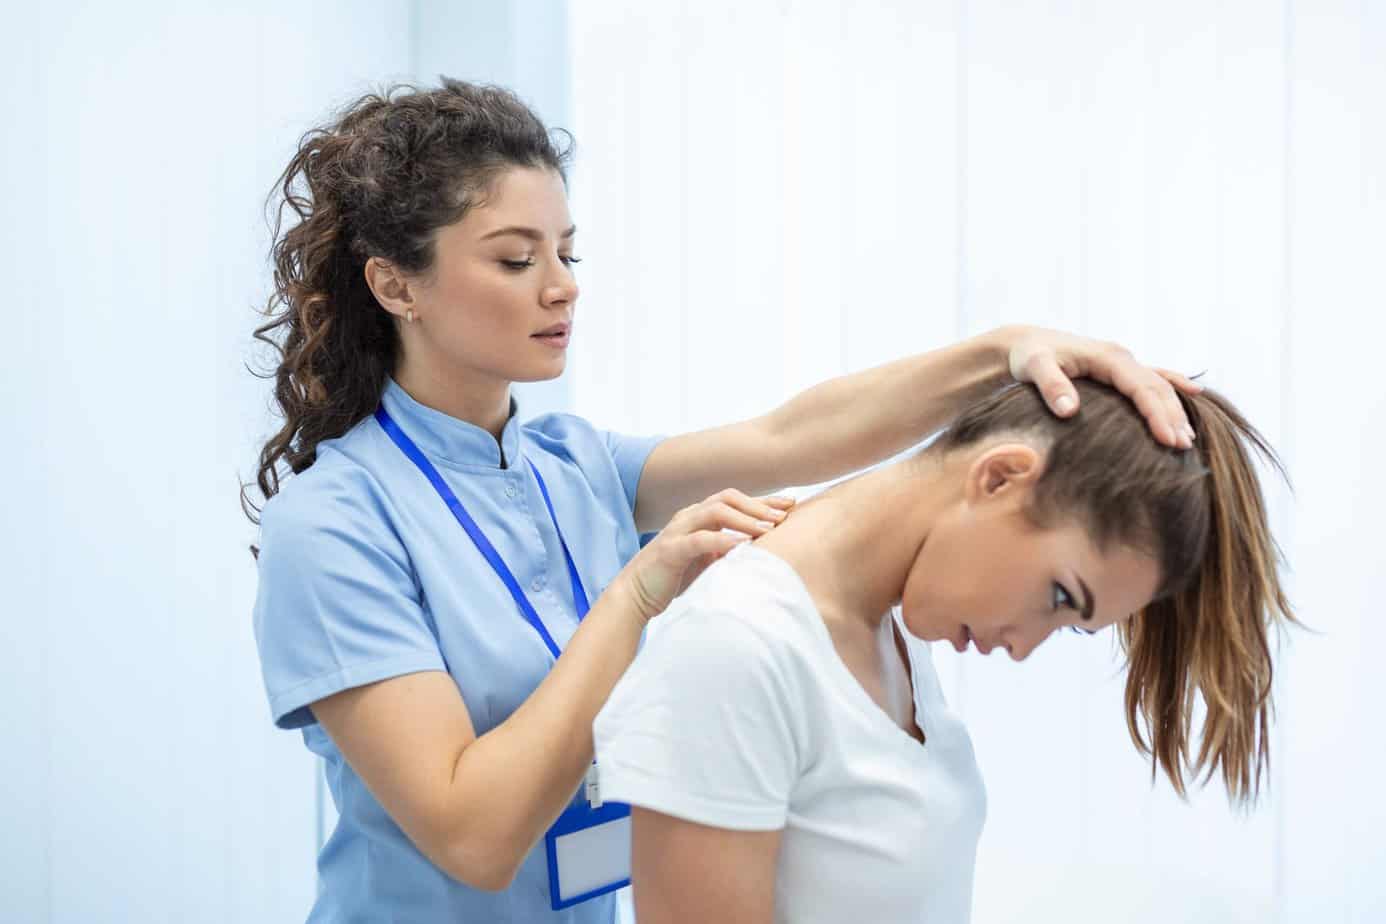 licensed-chiropractor-manual-therapist-doing-neck-stretch-massage-relaxed-female-patient-clinic-office-young-woman-with-whiplash-rheumatological-problem-getting-professional-doctor-s-help